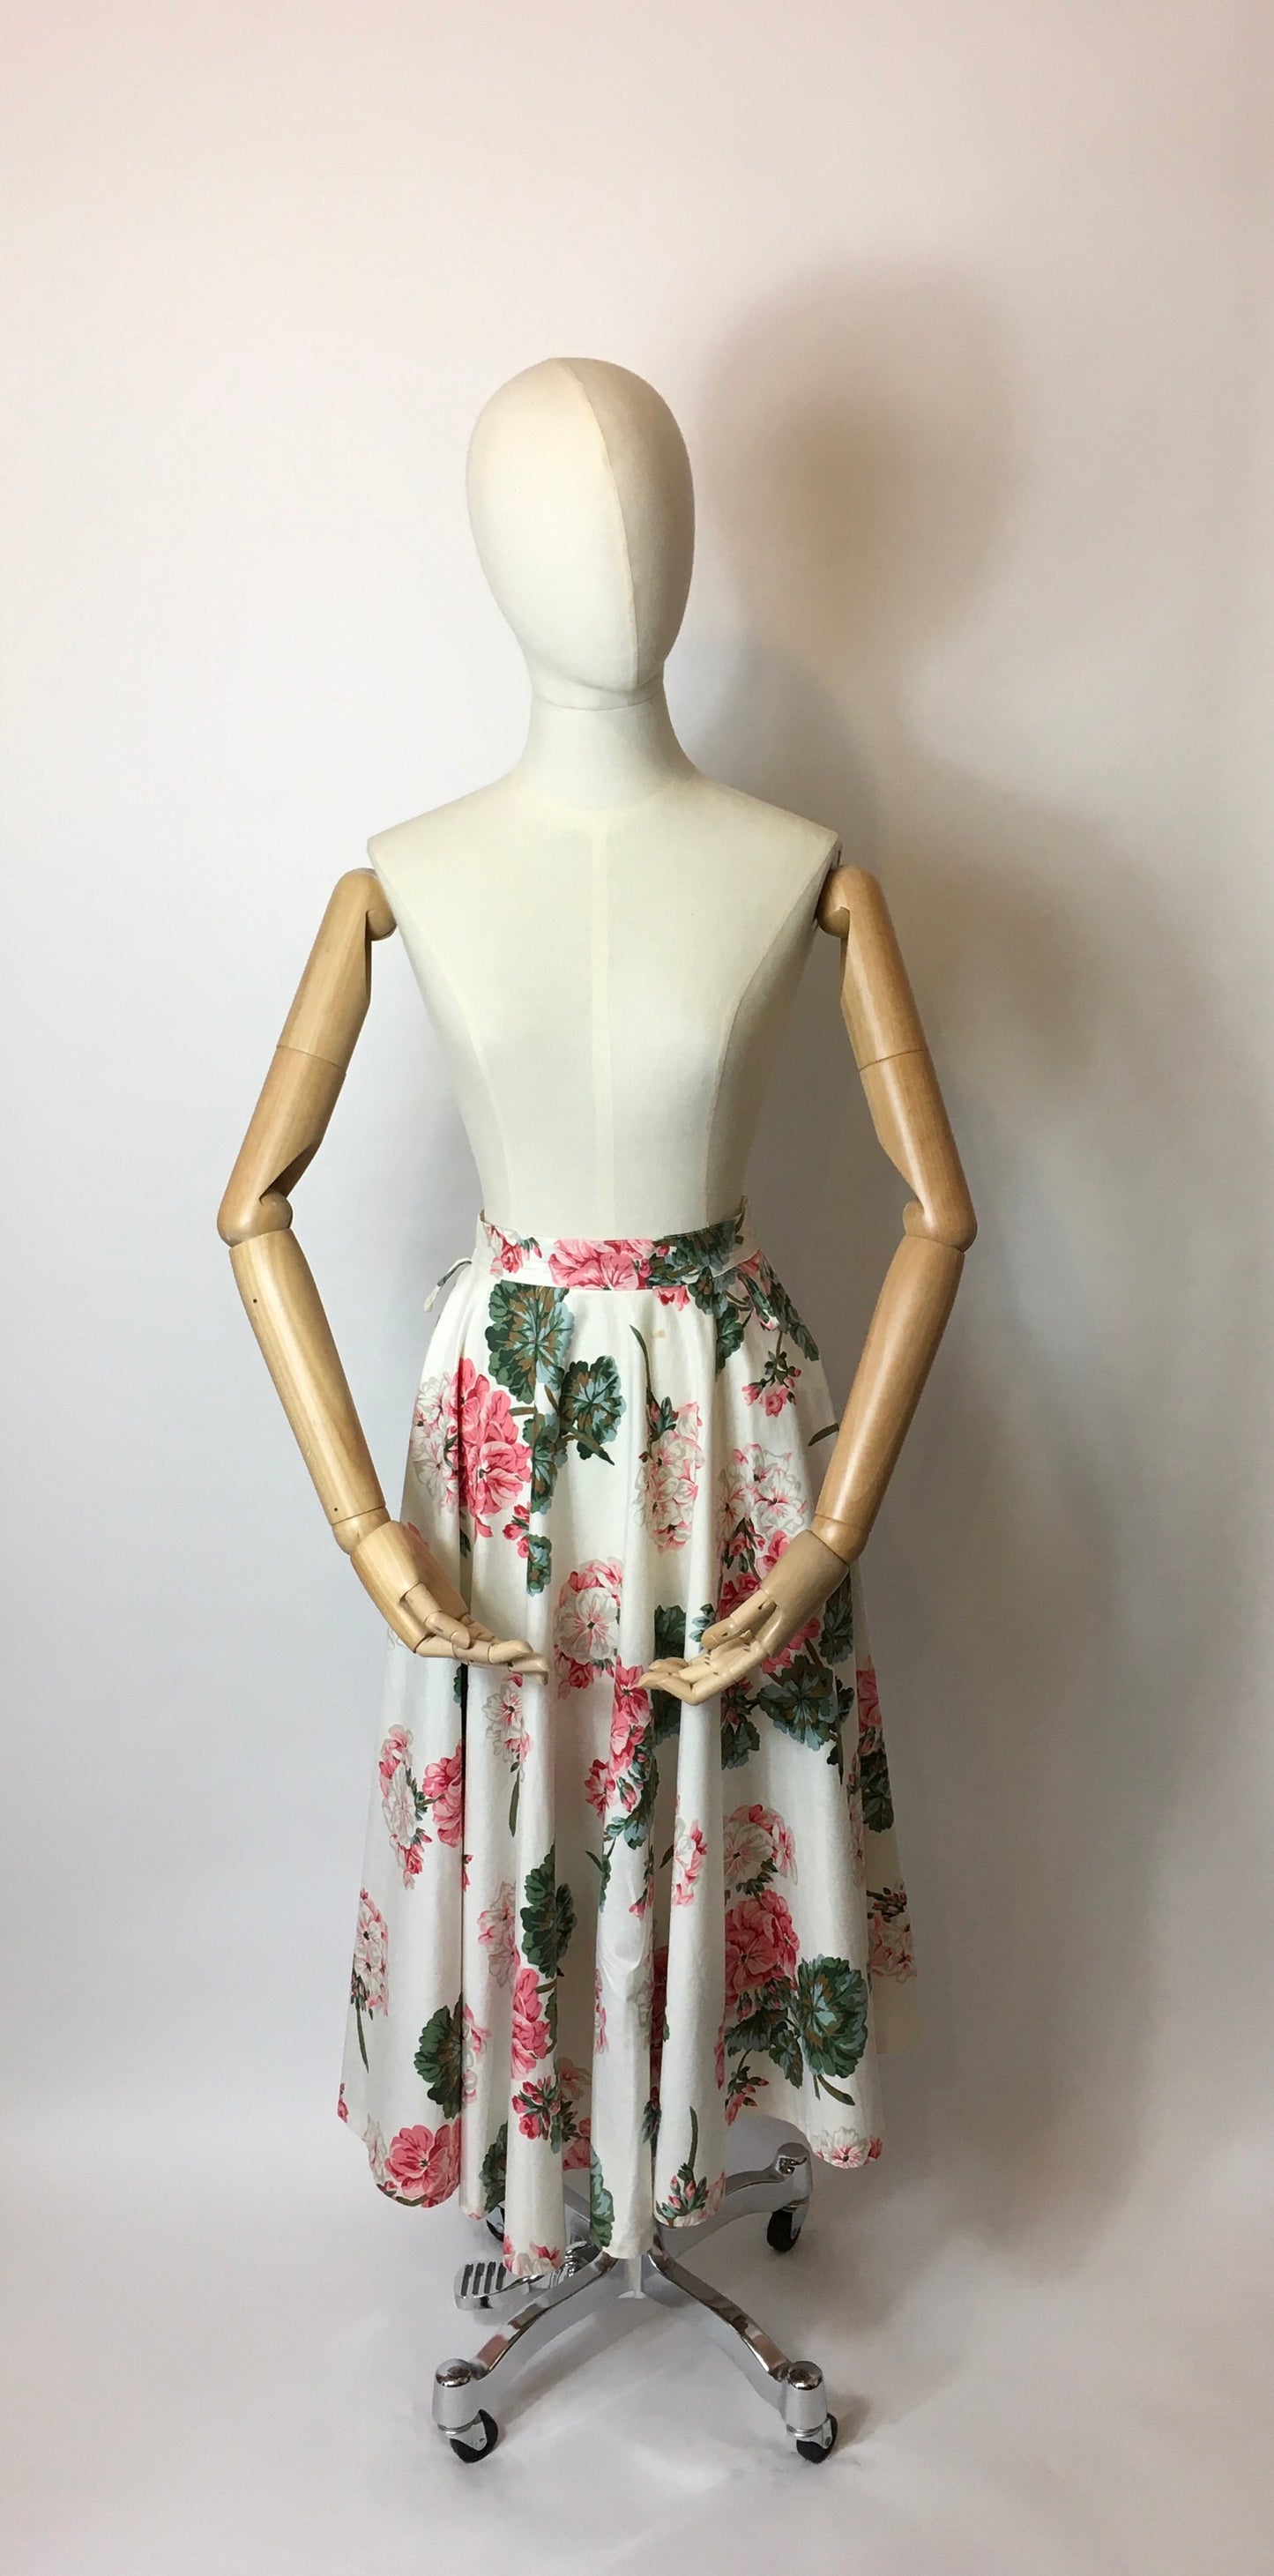 Original 1950s Darling Floral Cotton Sateen Skirt - Lovely Floral in Soft Pinks, rose pinks and warm greens